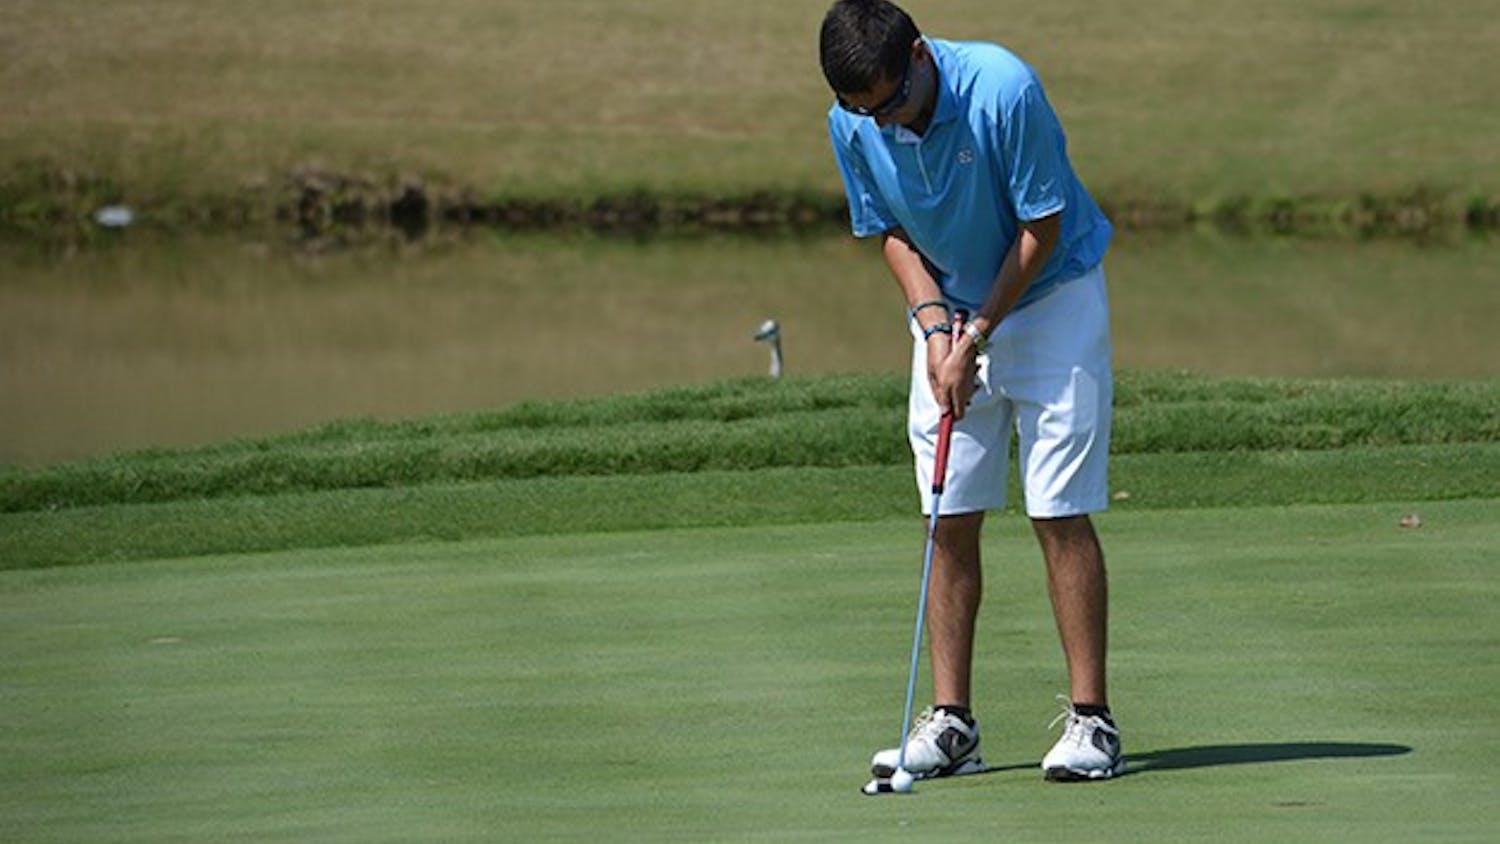 Brandon Dalinka lines up a short putt. UNC placed fourth in the Tar Heel Intercollegiate tournament this weekend at UNC Finley golf course.